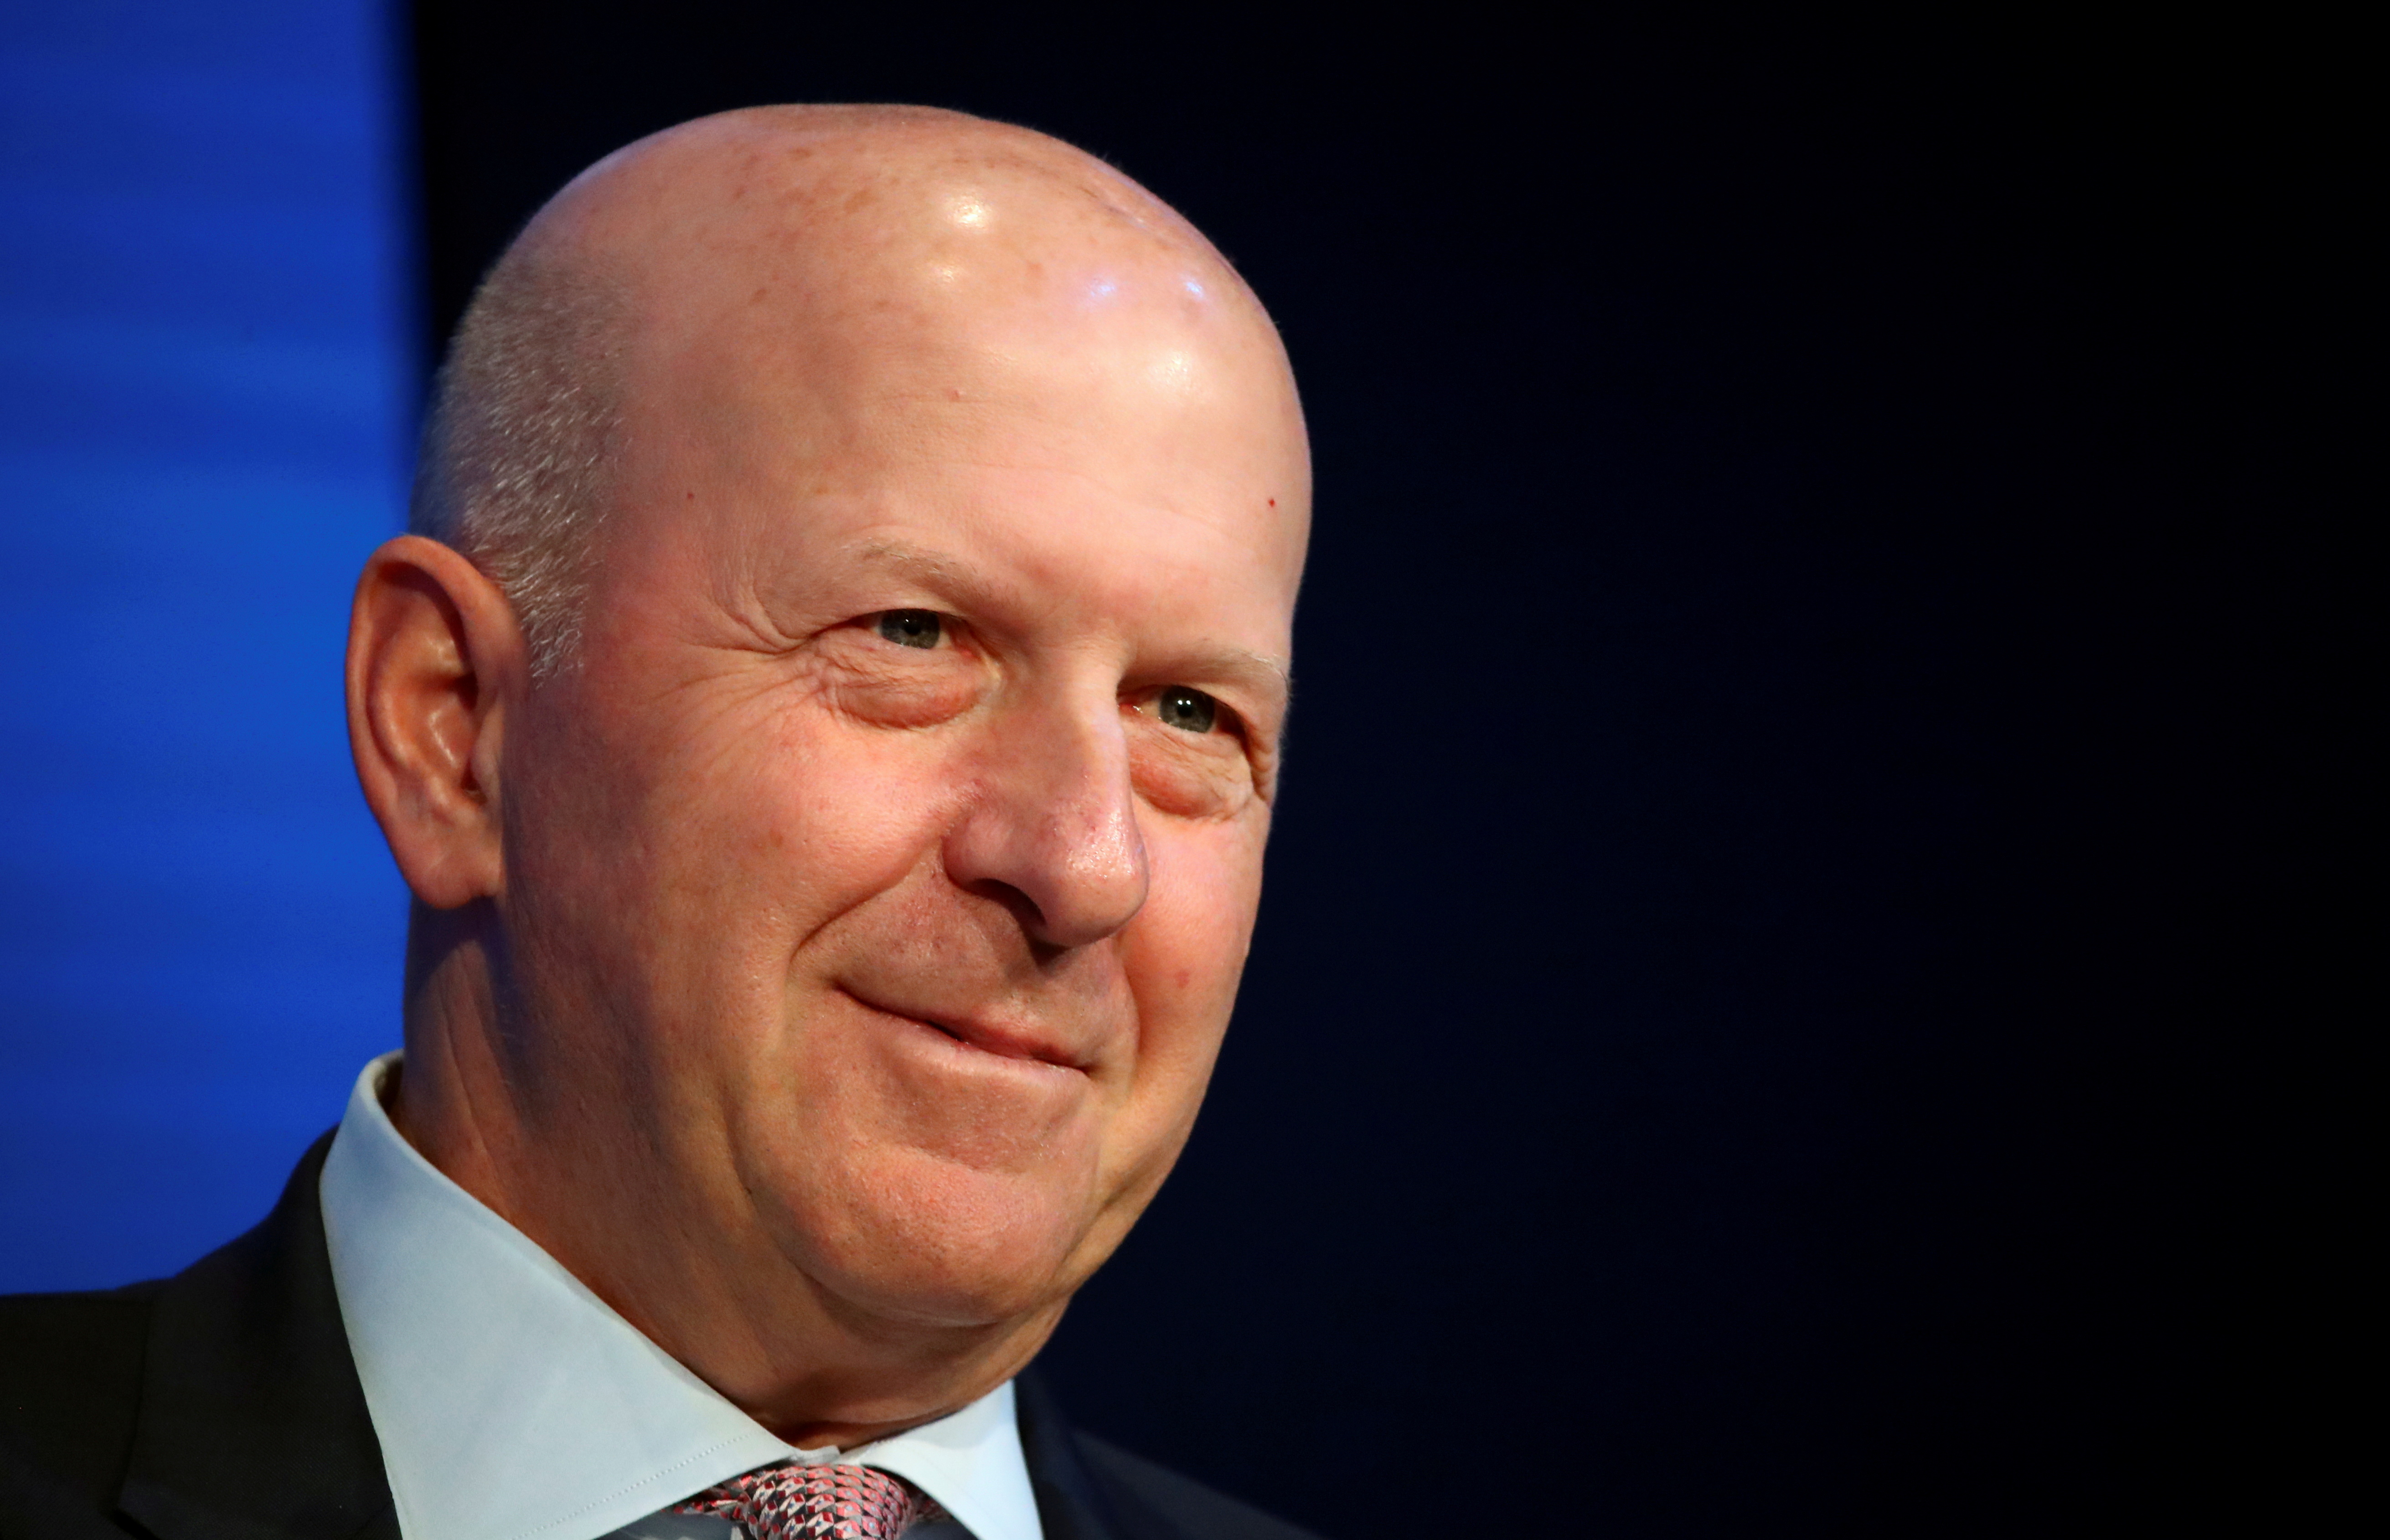 Goldman Sachs' Chairman and CEO David Solomon attends a session at the 50th World Economic Forum (WEF) annual meeting in Davos, Switzerland, January 21, 2020. REUTERS/Denis Balibouse/File Photo